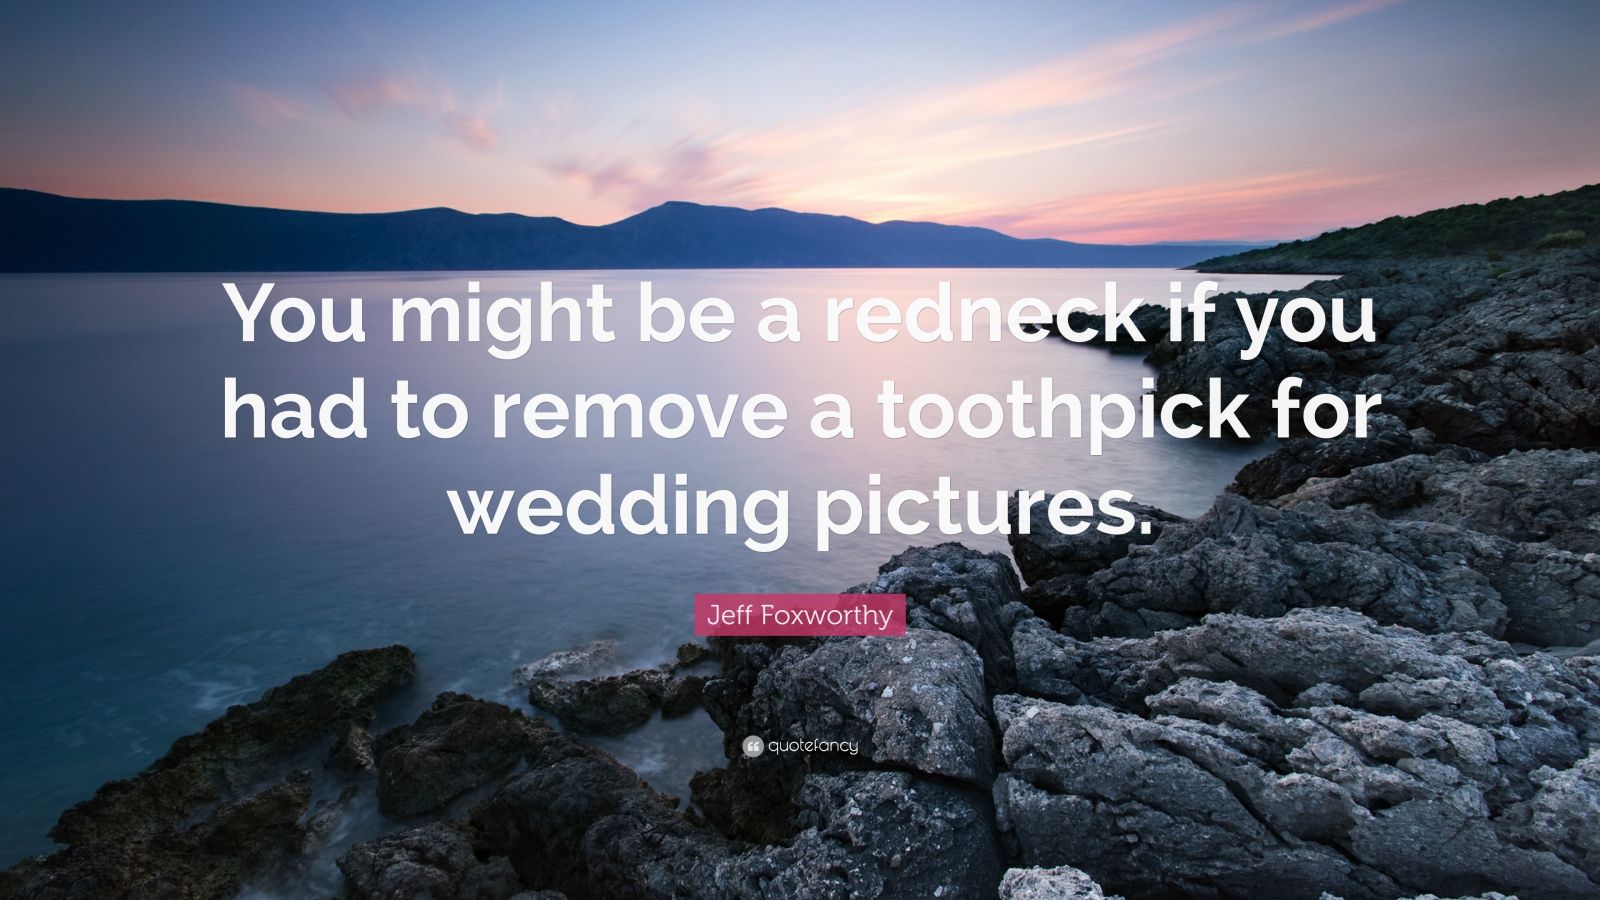 Jeff Foxworthy Quote: "You might be a redneck if you had to remove a toothpick for wedding ...